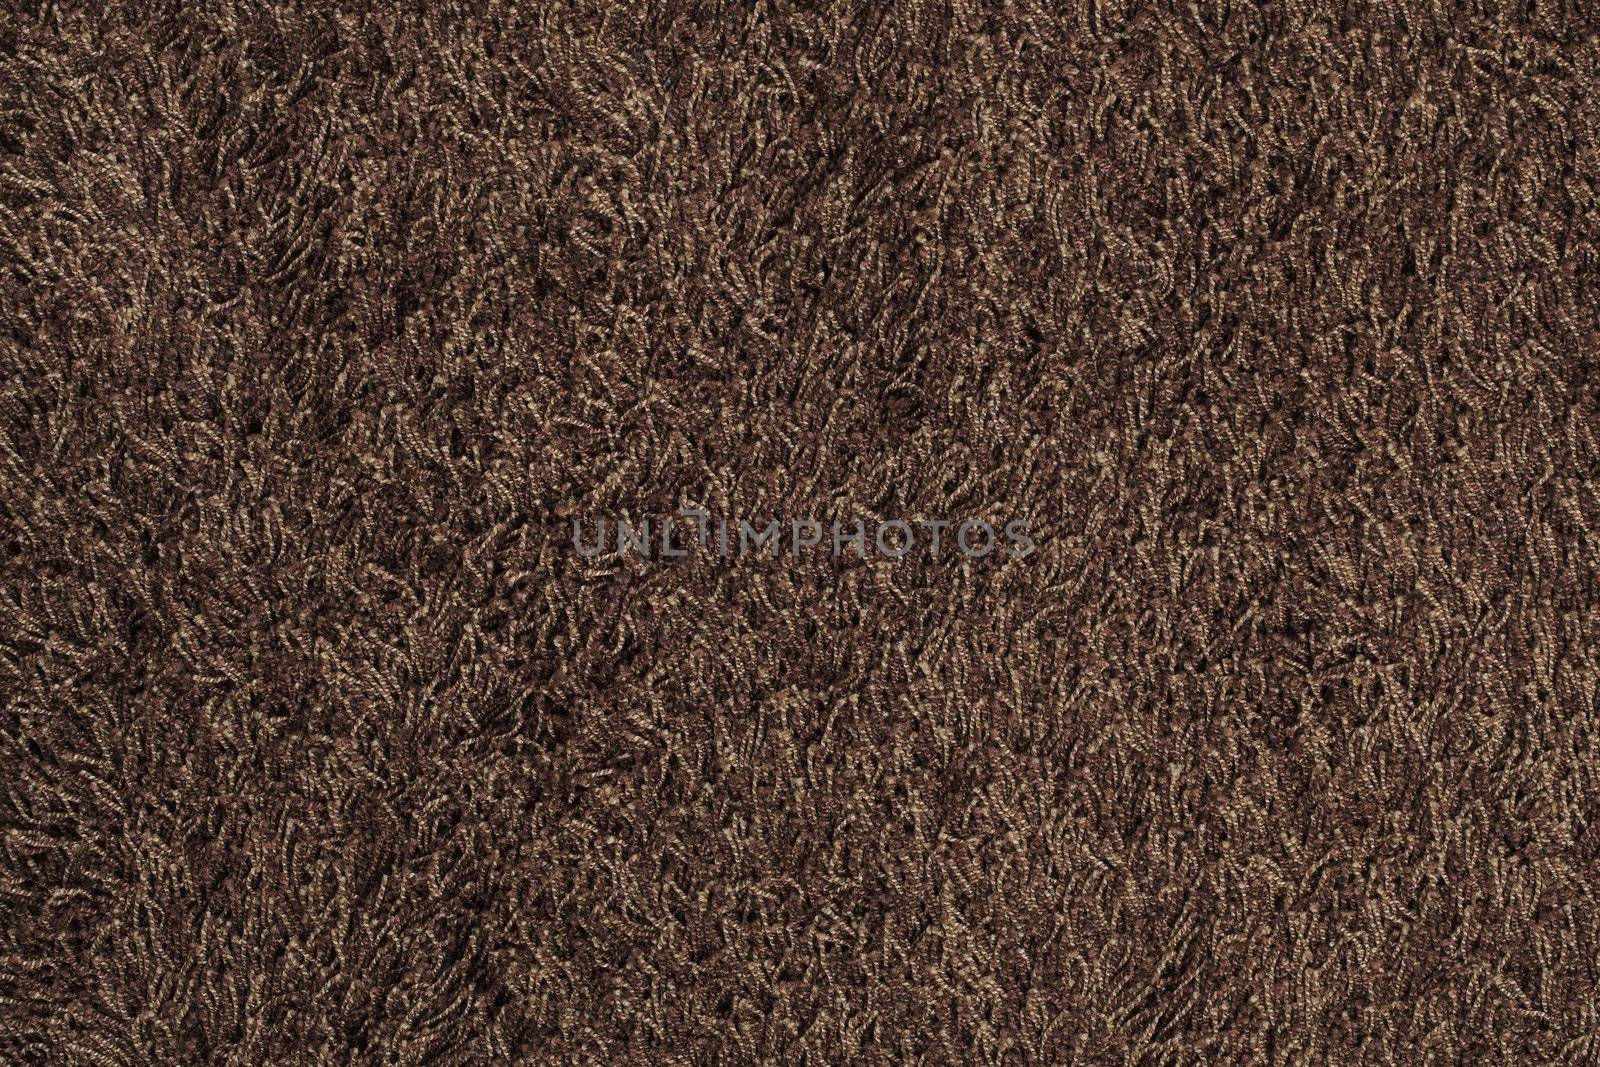 Brown rug by Stocksnapper